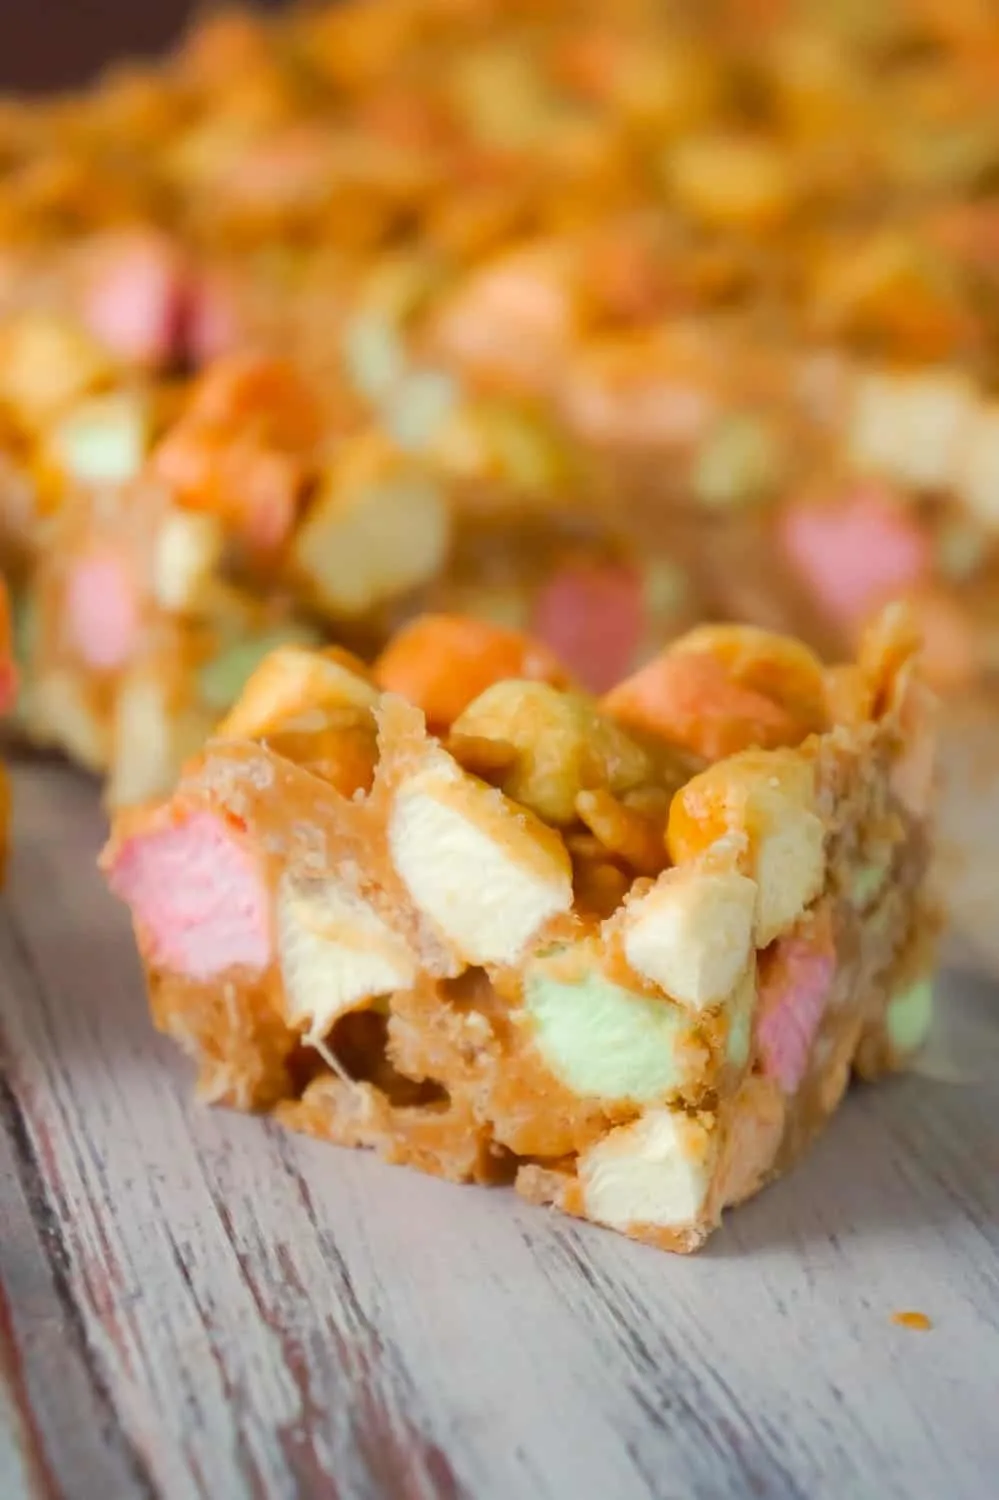 Peanut Butter Marshmallow Bars are an easy dessert recipe perfect for your holiday treat tray. These peanut butter and butterscotch confetti squares are loaded with colourful mini marshmallows, Rice Krispies and shredded coconut.